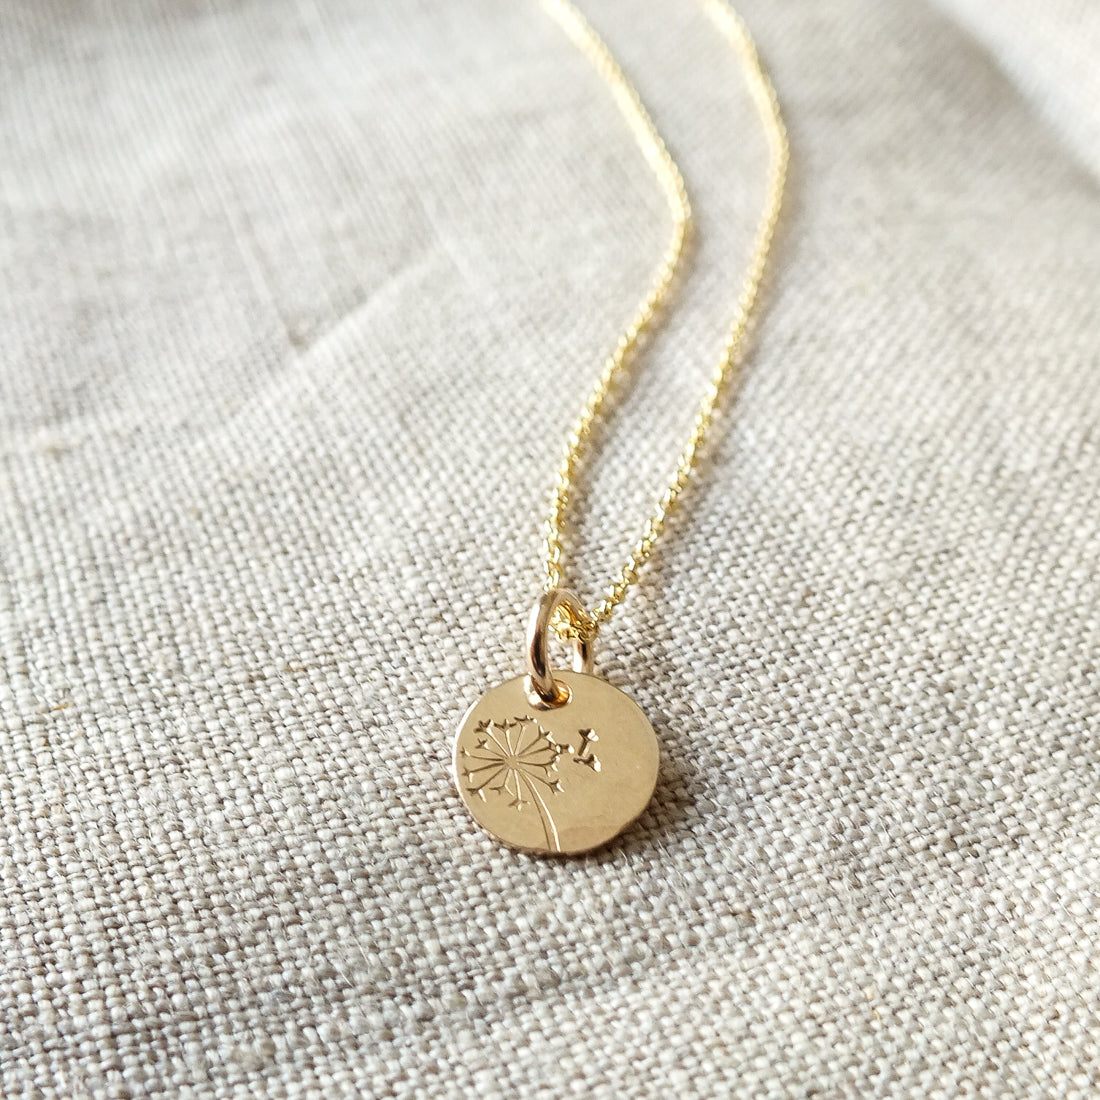 Becoming Jewelry&#39;s Dandelion Wishes Necklace features a round pendant with a dandelion design on a textured fabric.